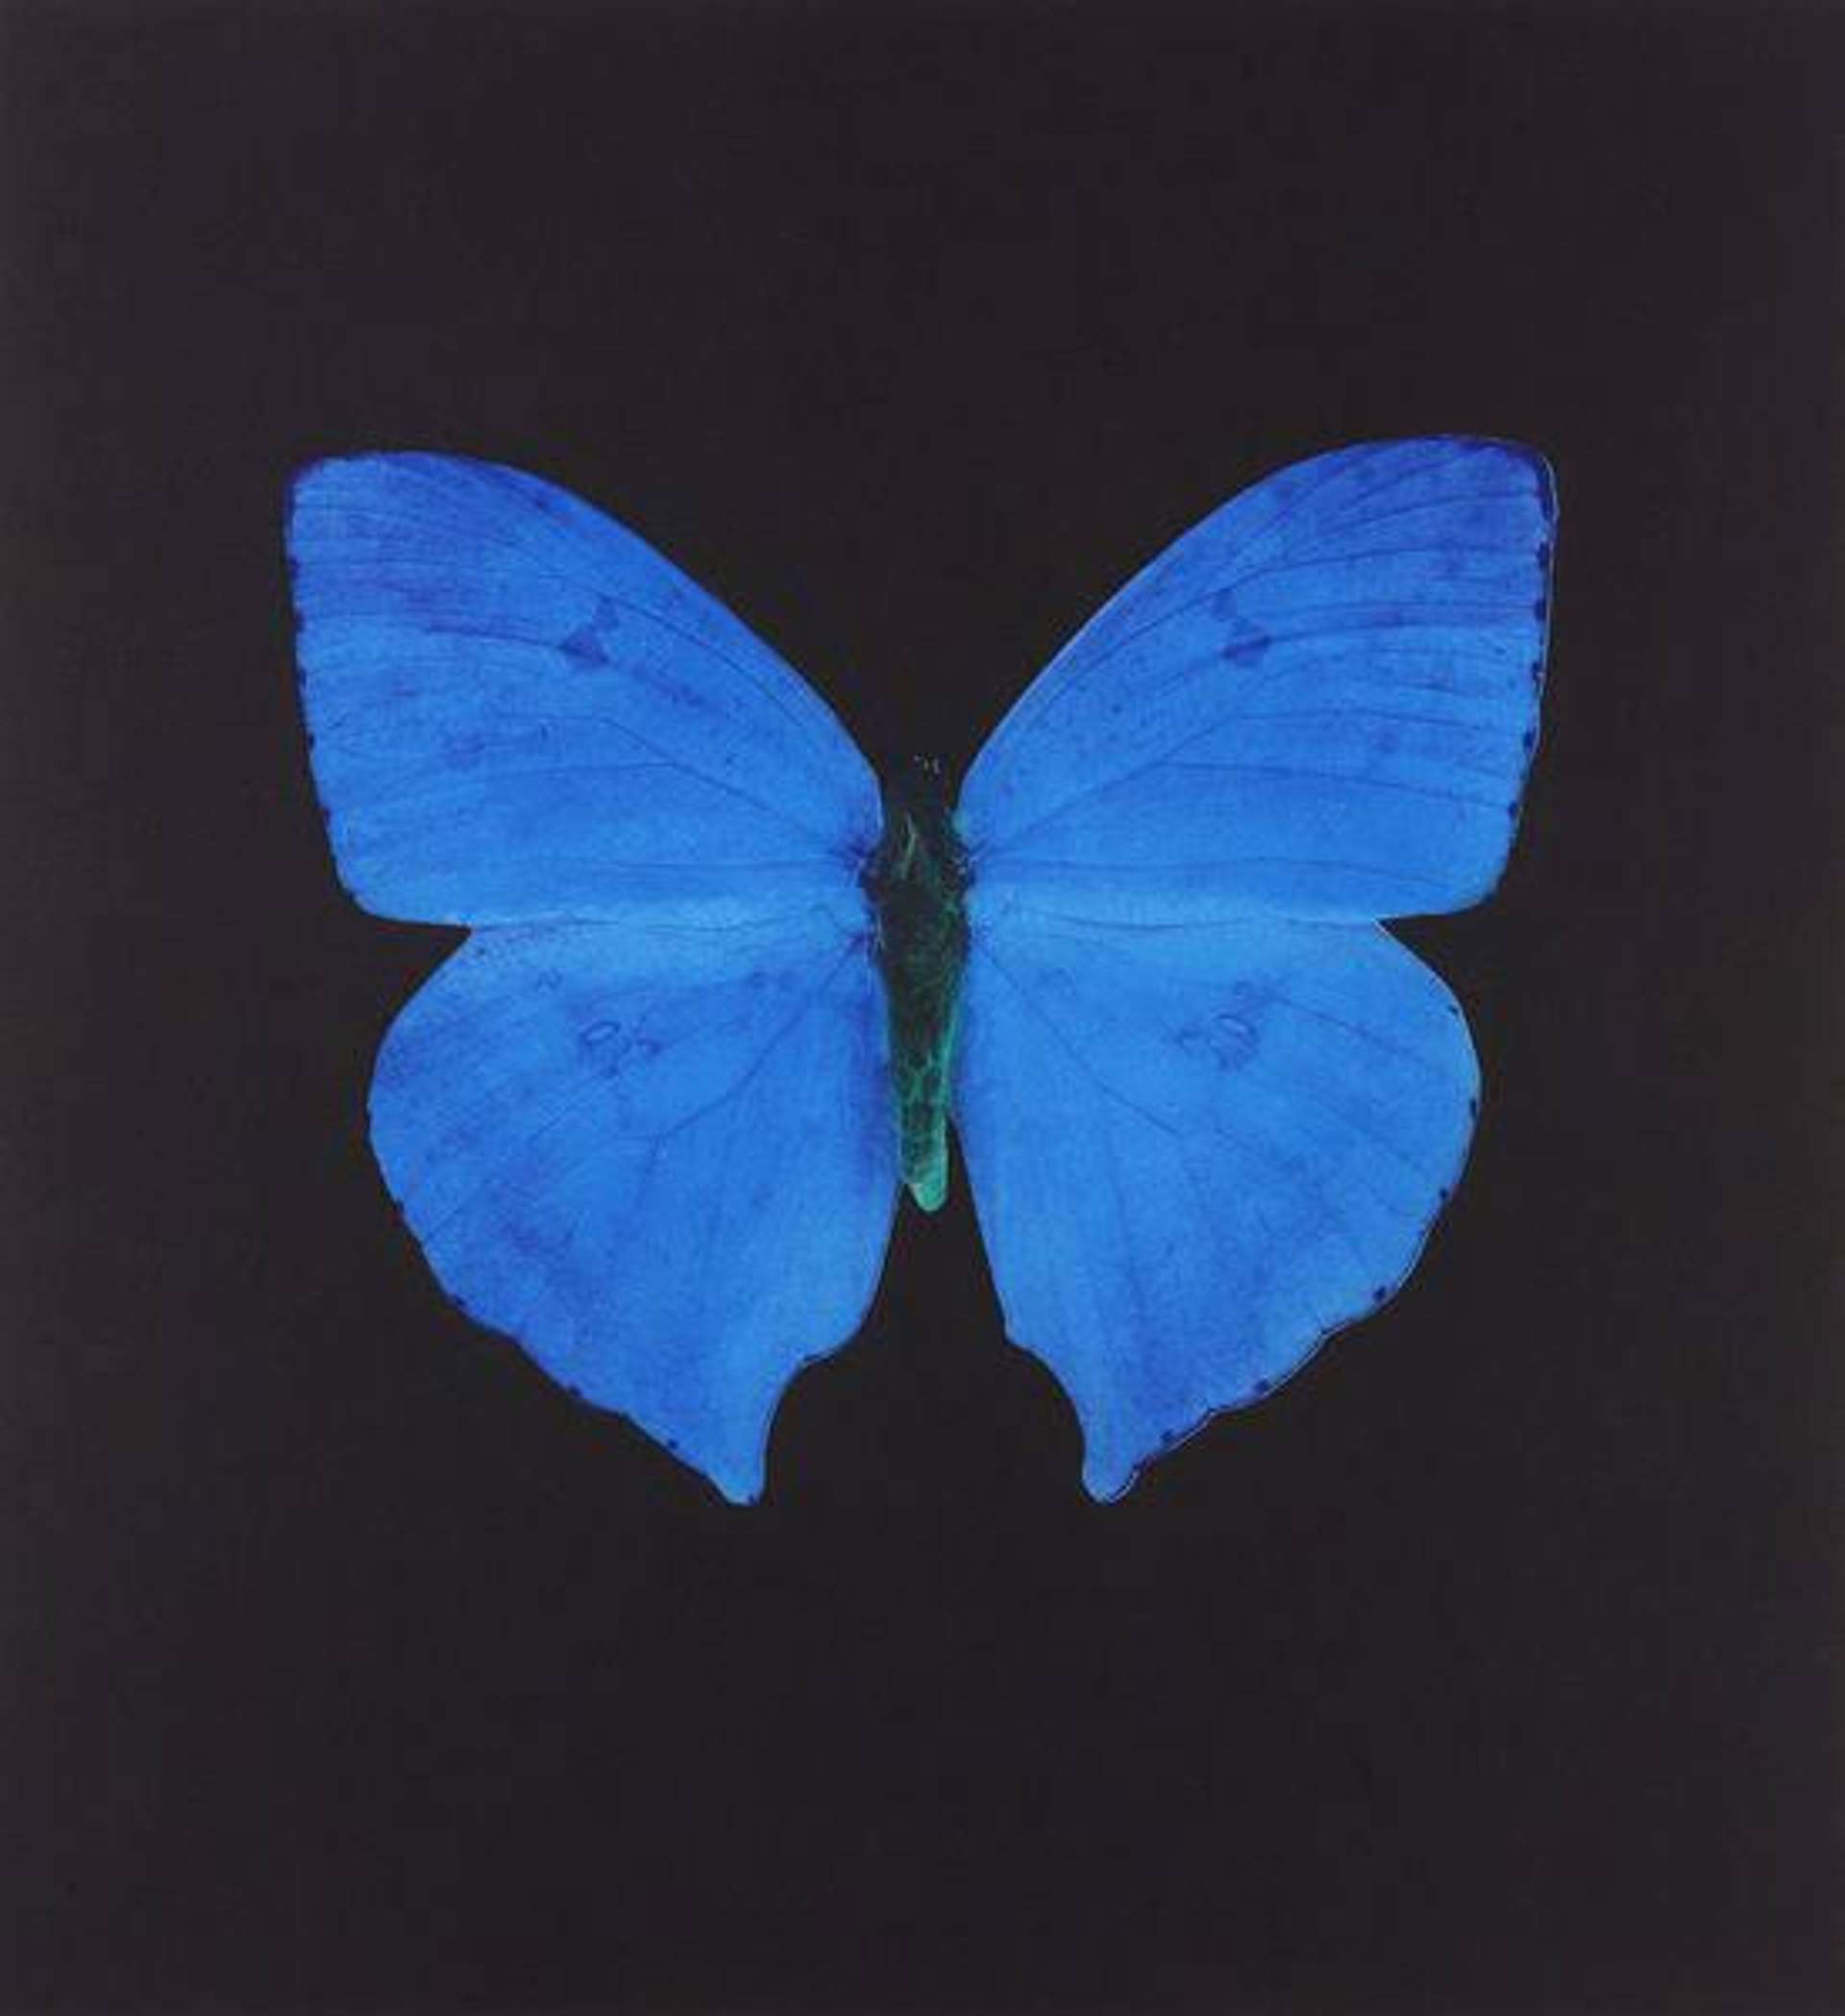 Damien Hirst: Butterfly Blue - Signed Print